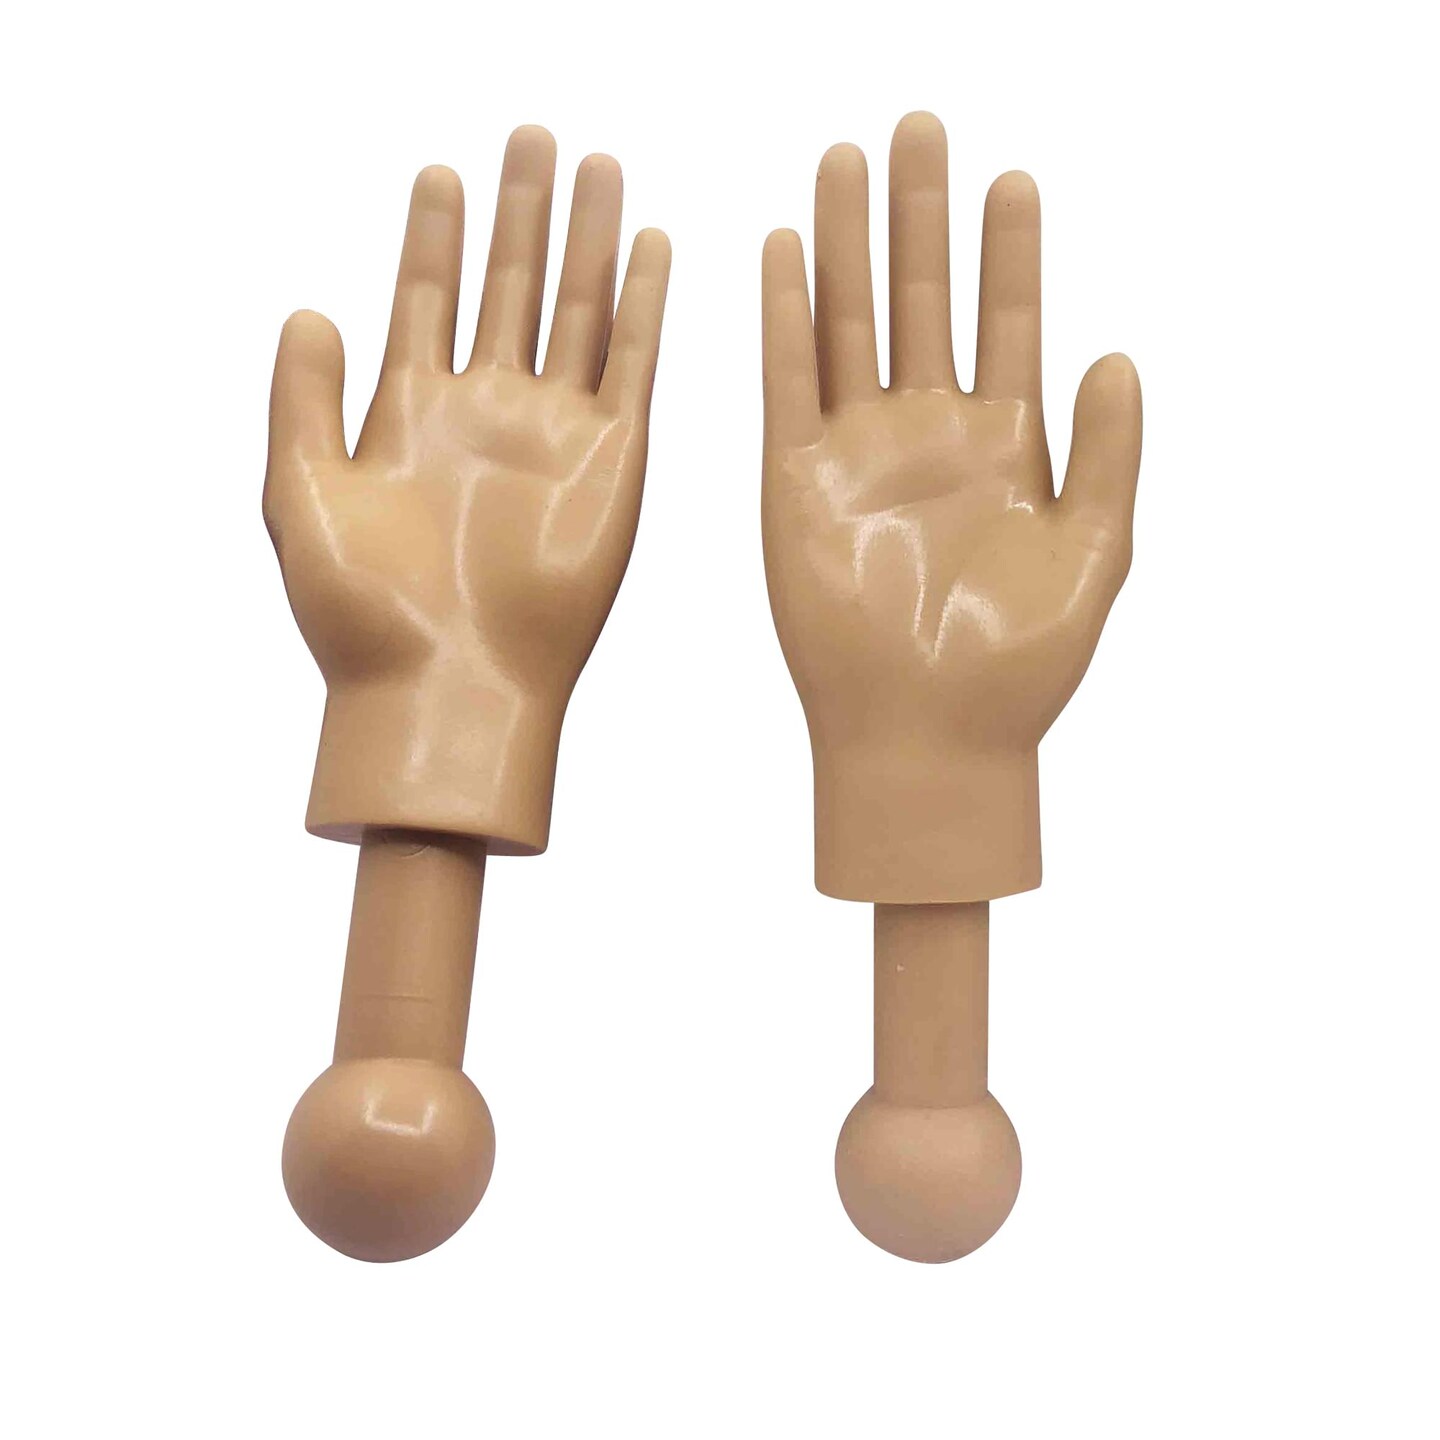 Tiny Hands 4.5-Inch Novelty Toys | Left and Right Hands, Tan